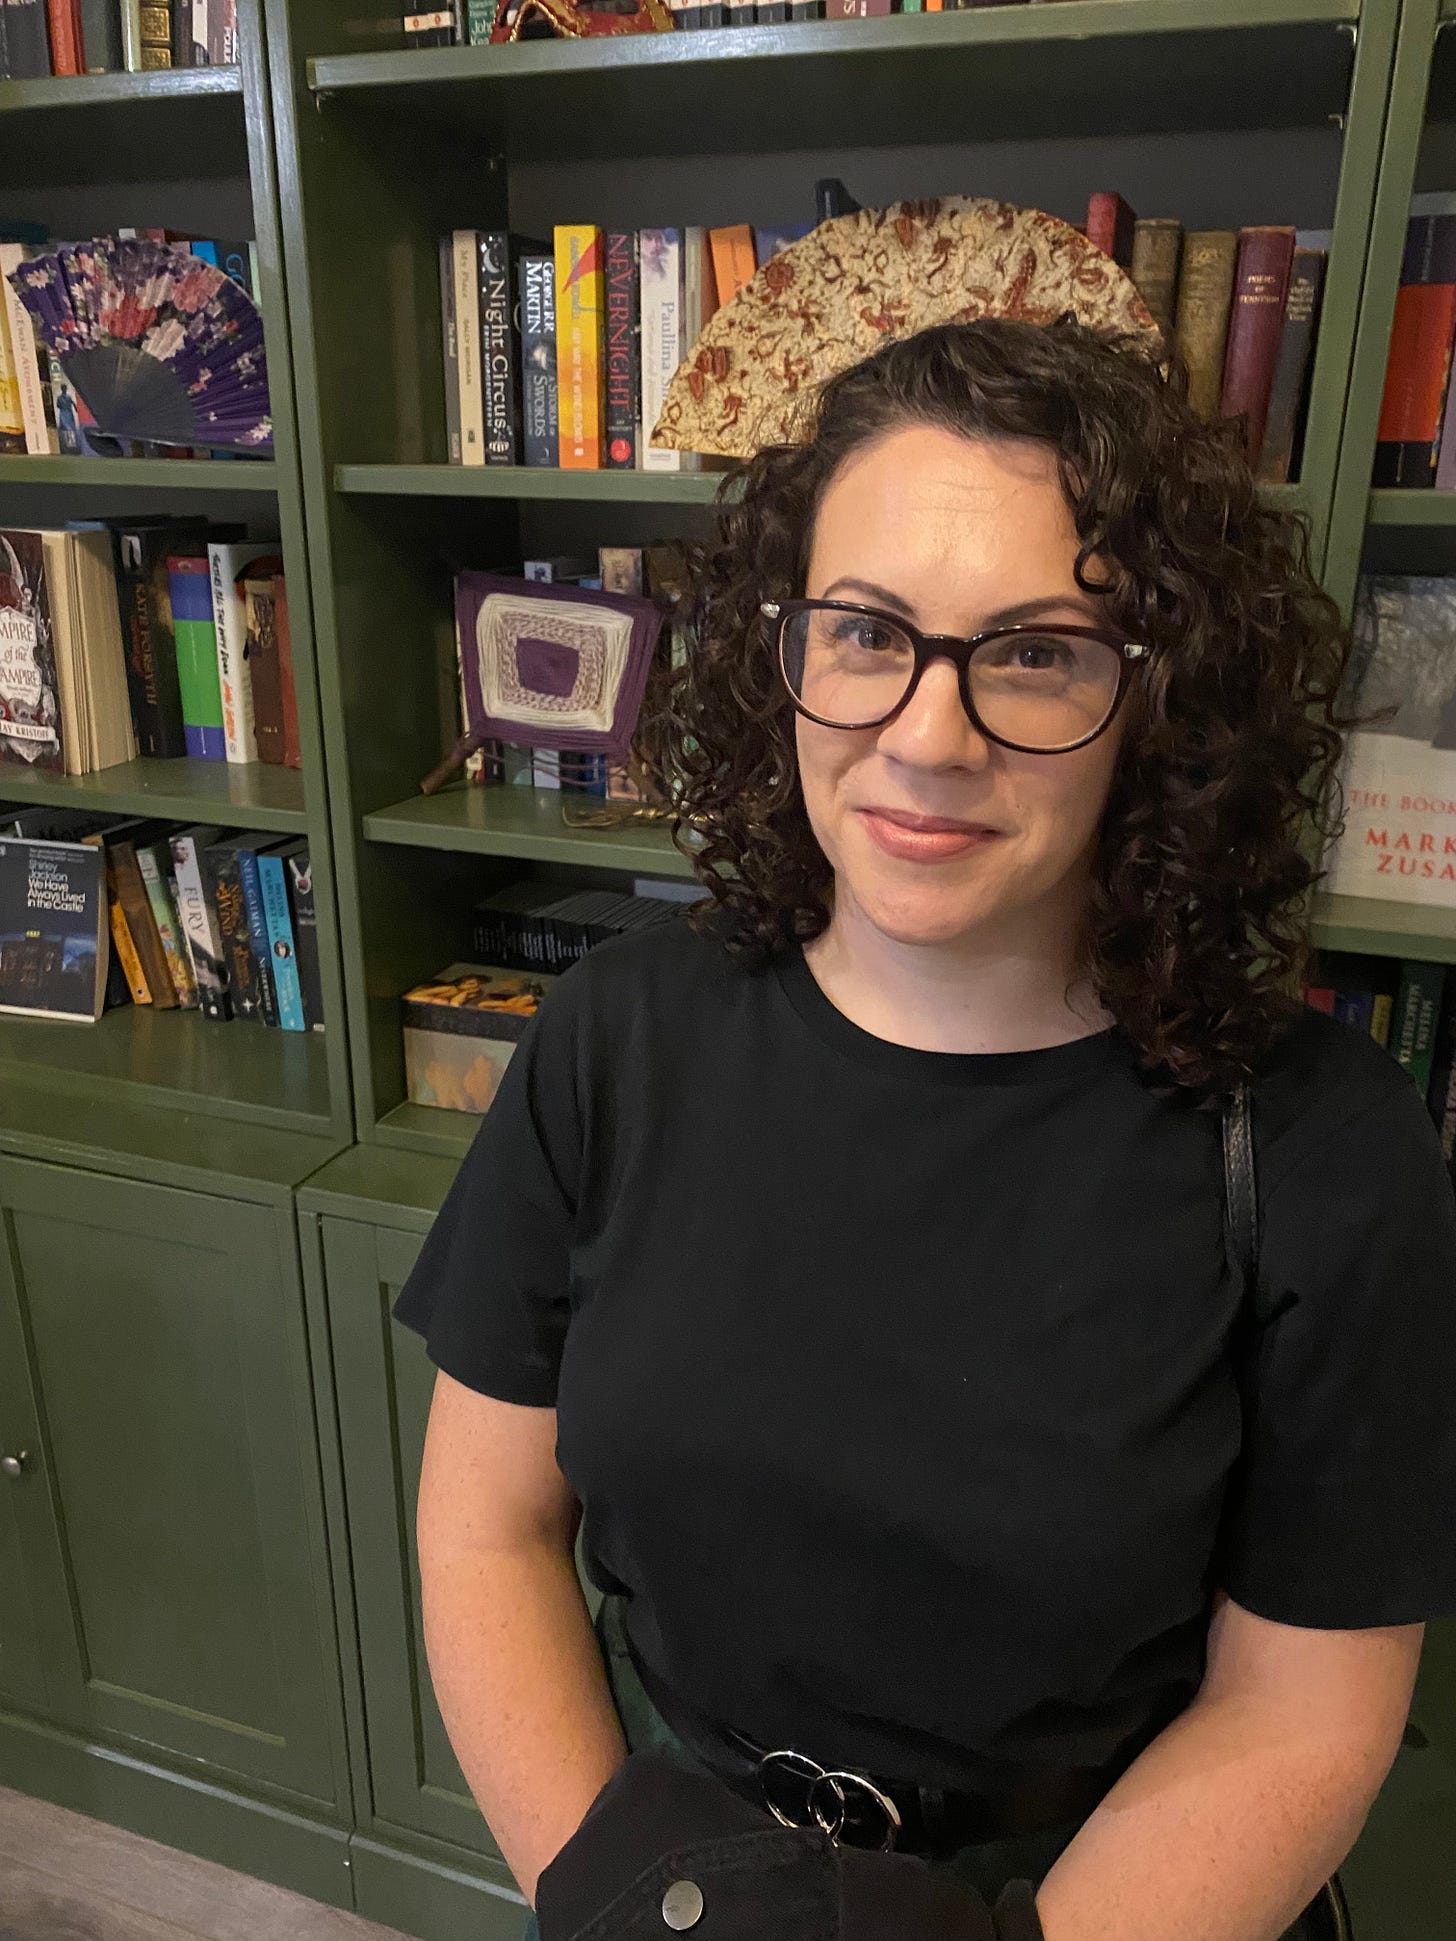 A picture of the author standing in front of a bookcase messily arranged with books and trinkets. The author has glasses on, curly hair, an awkward smile, and a black t-shirt.